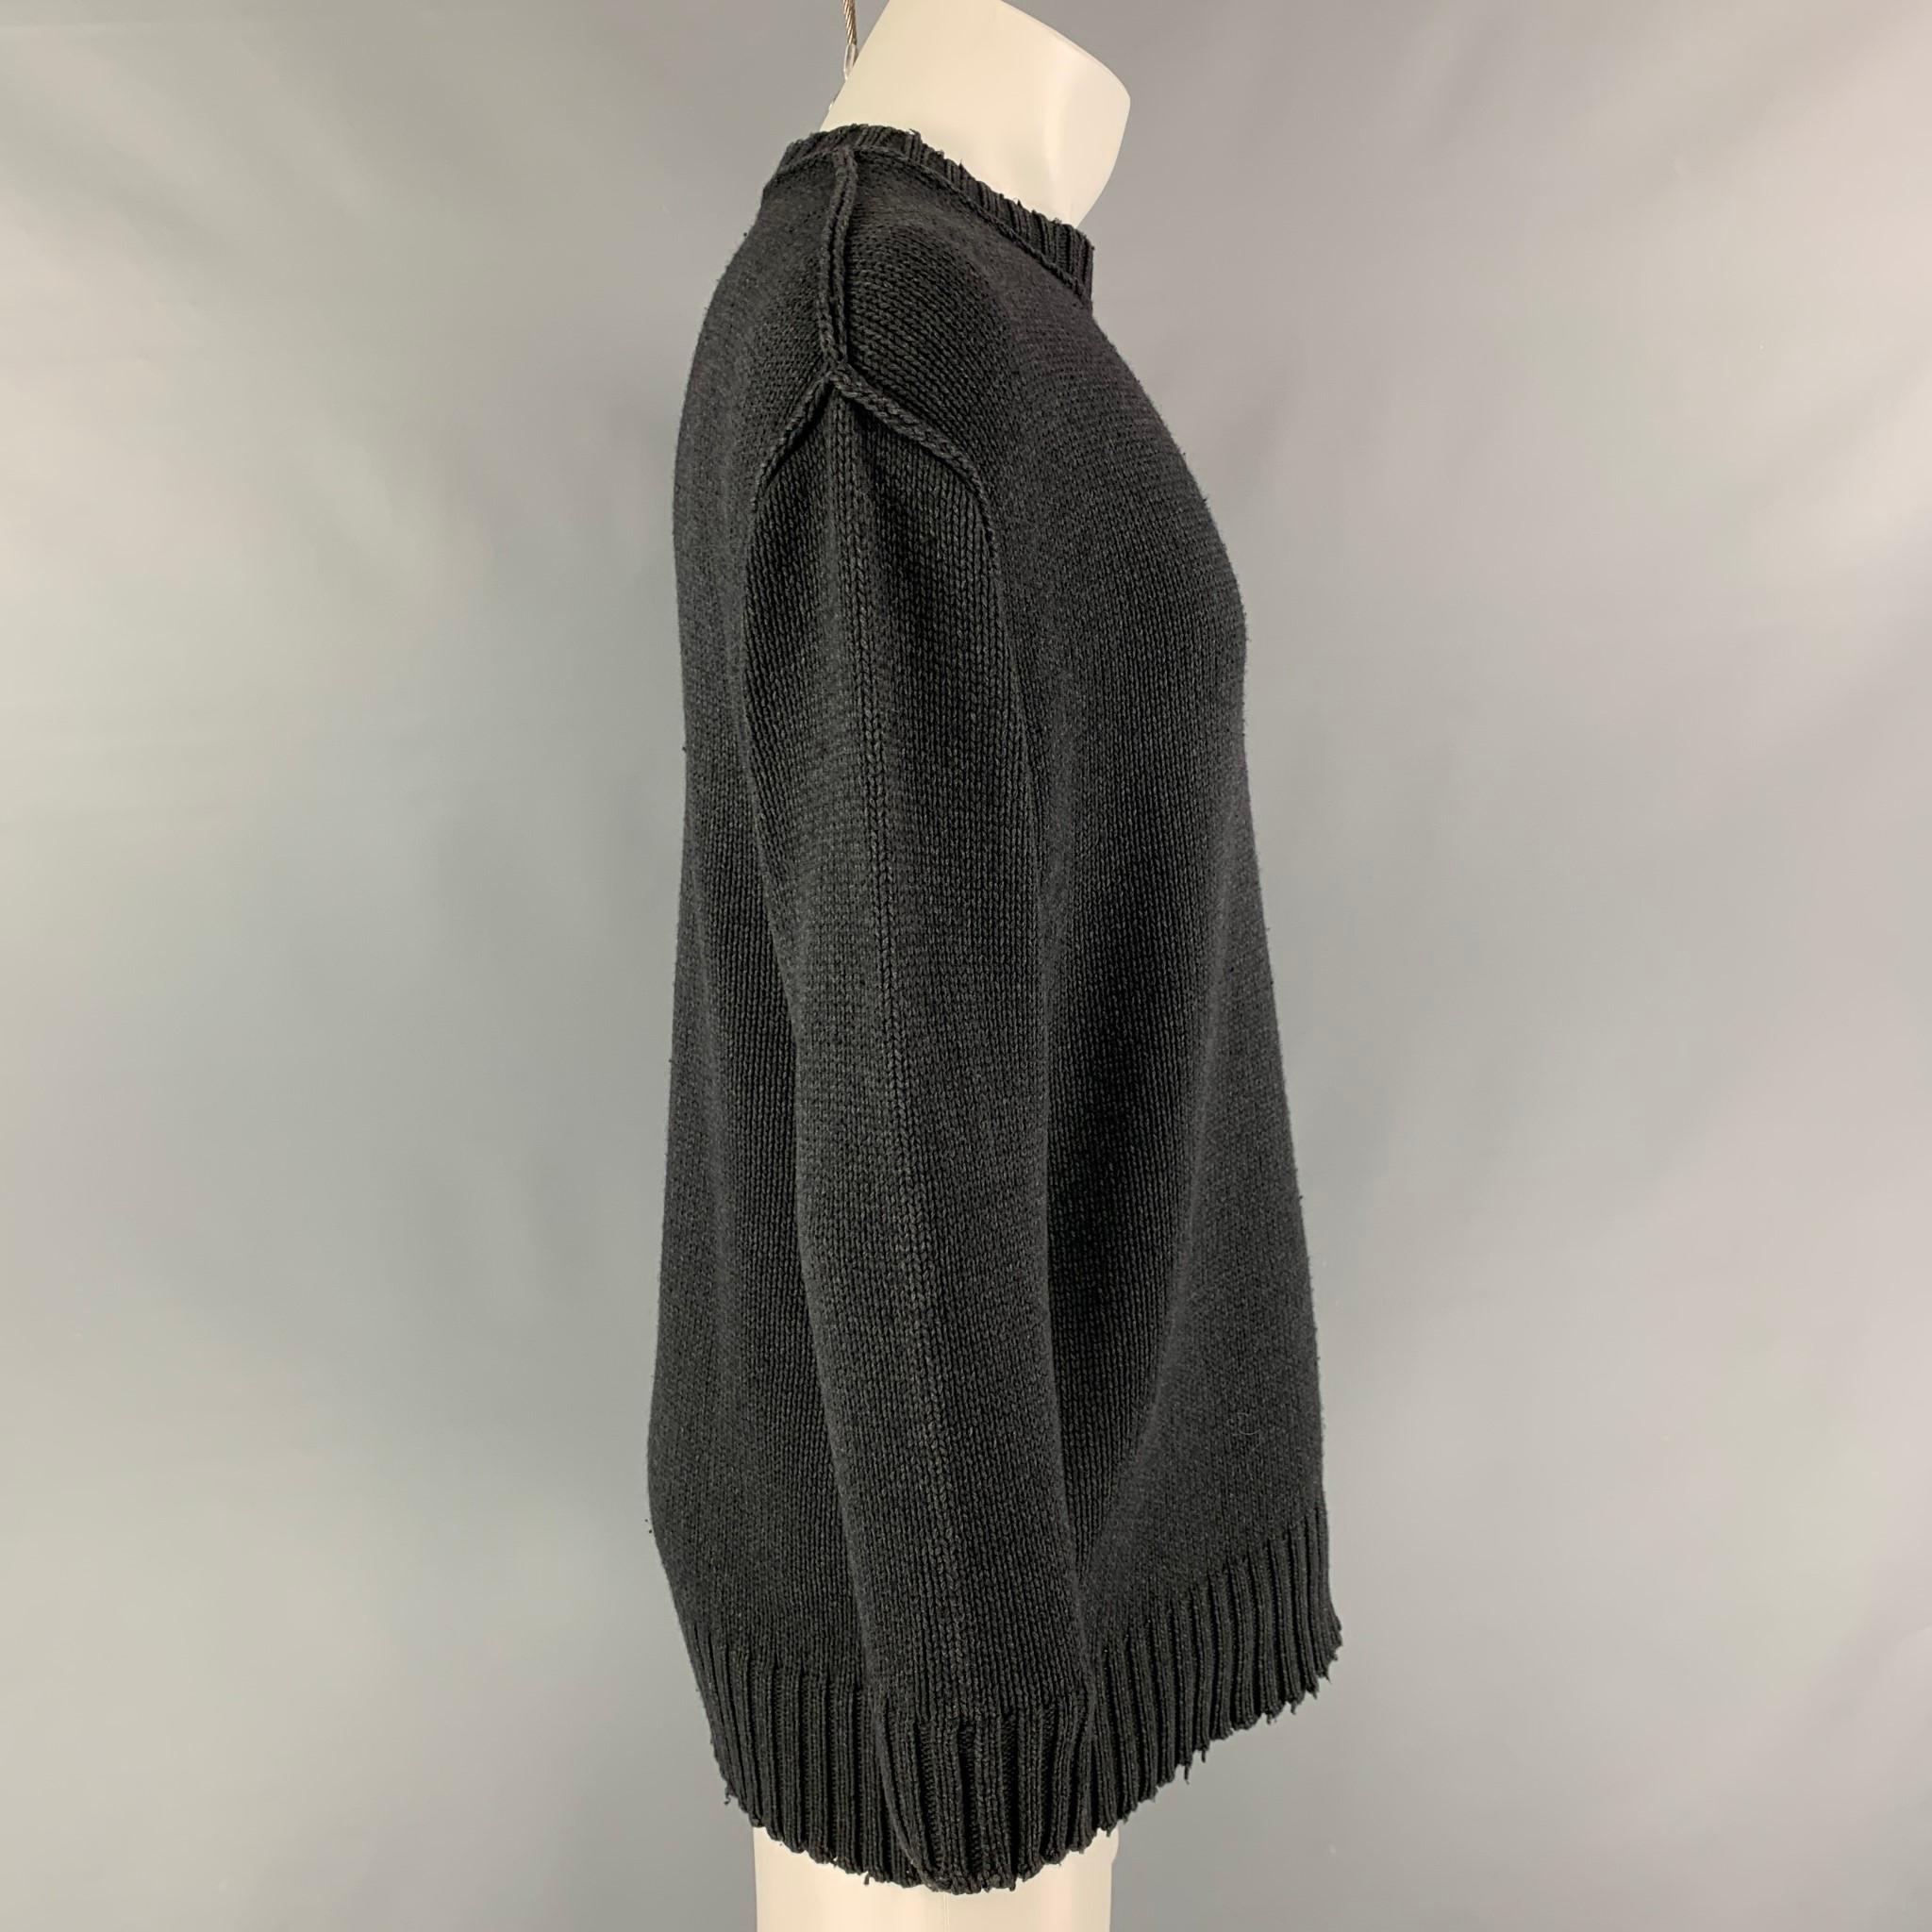 R13 sweater comes in a charcoal acrylic / wool featuring a oversized fit, distressed, and a crew-neck. 

Very Good Pre-Owned Condition.
Marked: XS

Measurements:

Shoulder: 22 in.
Chest: 45 in.
Sleeve: 22.5 in.
Length: 29 in. 